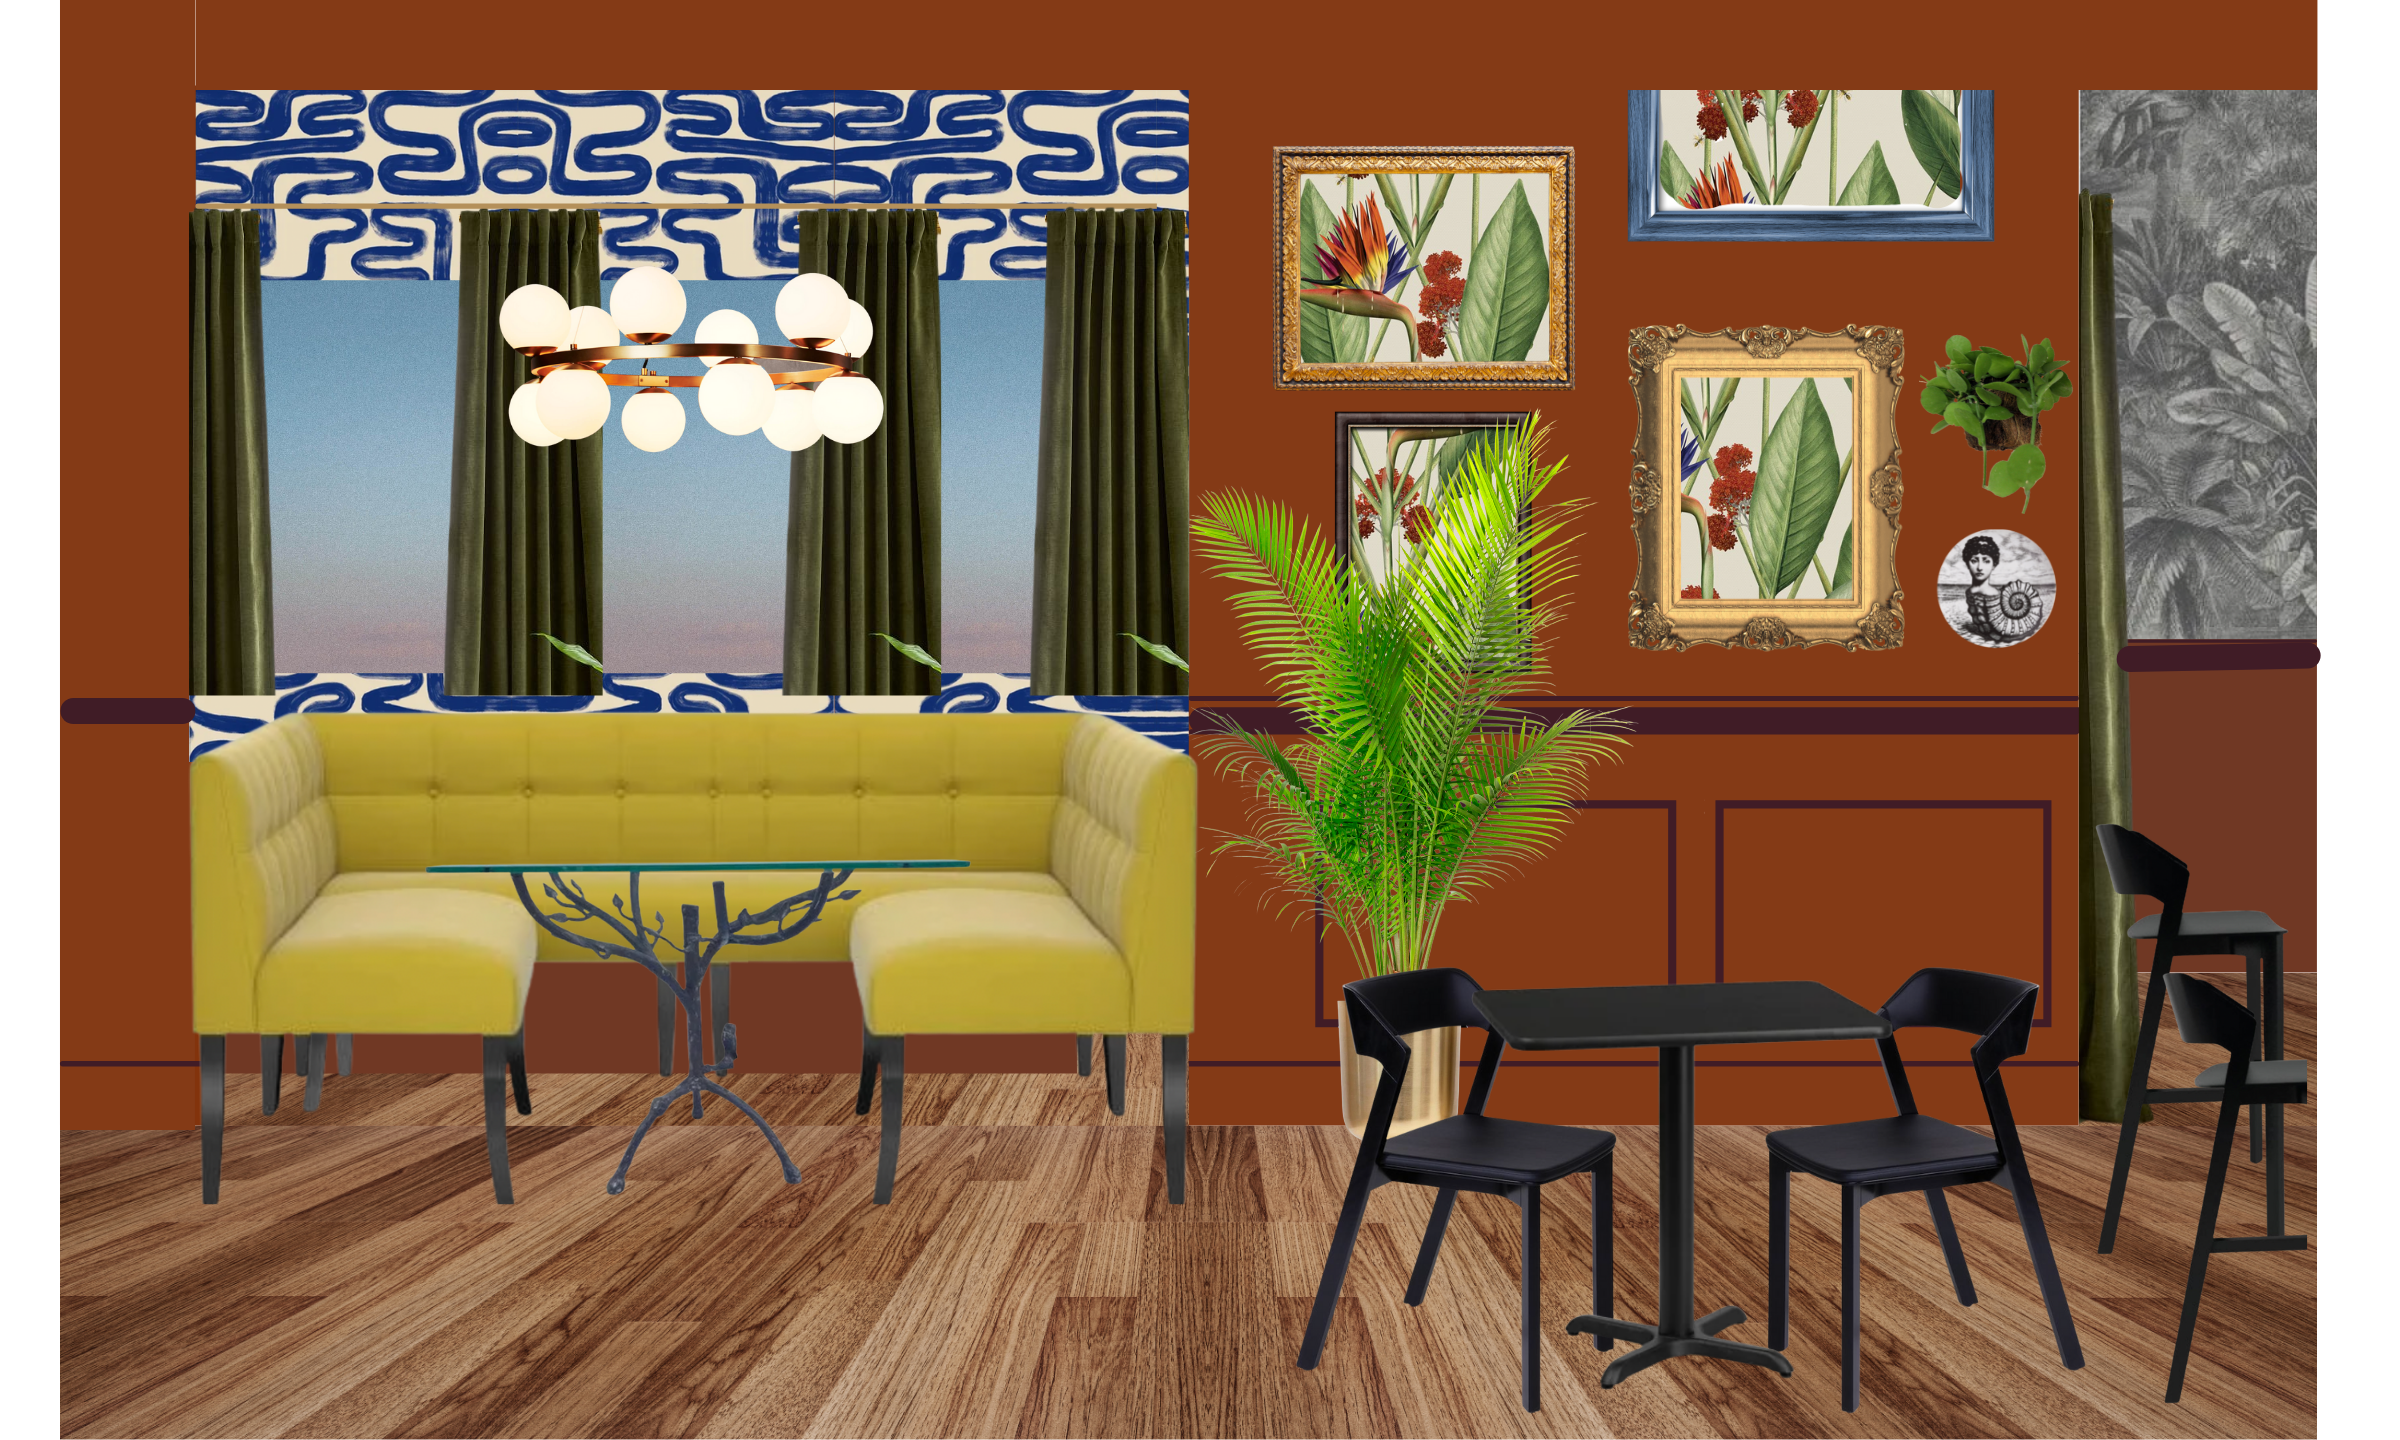 Banquette Dining Area - lighting option 1 - total_ $578.27.png